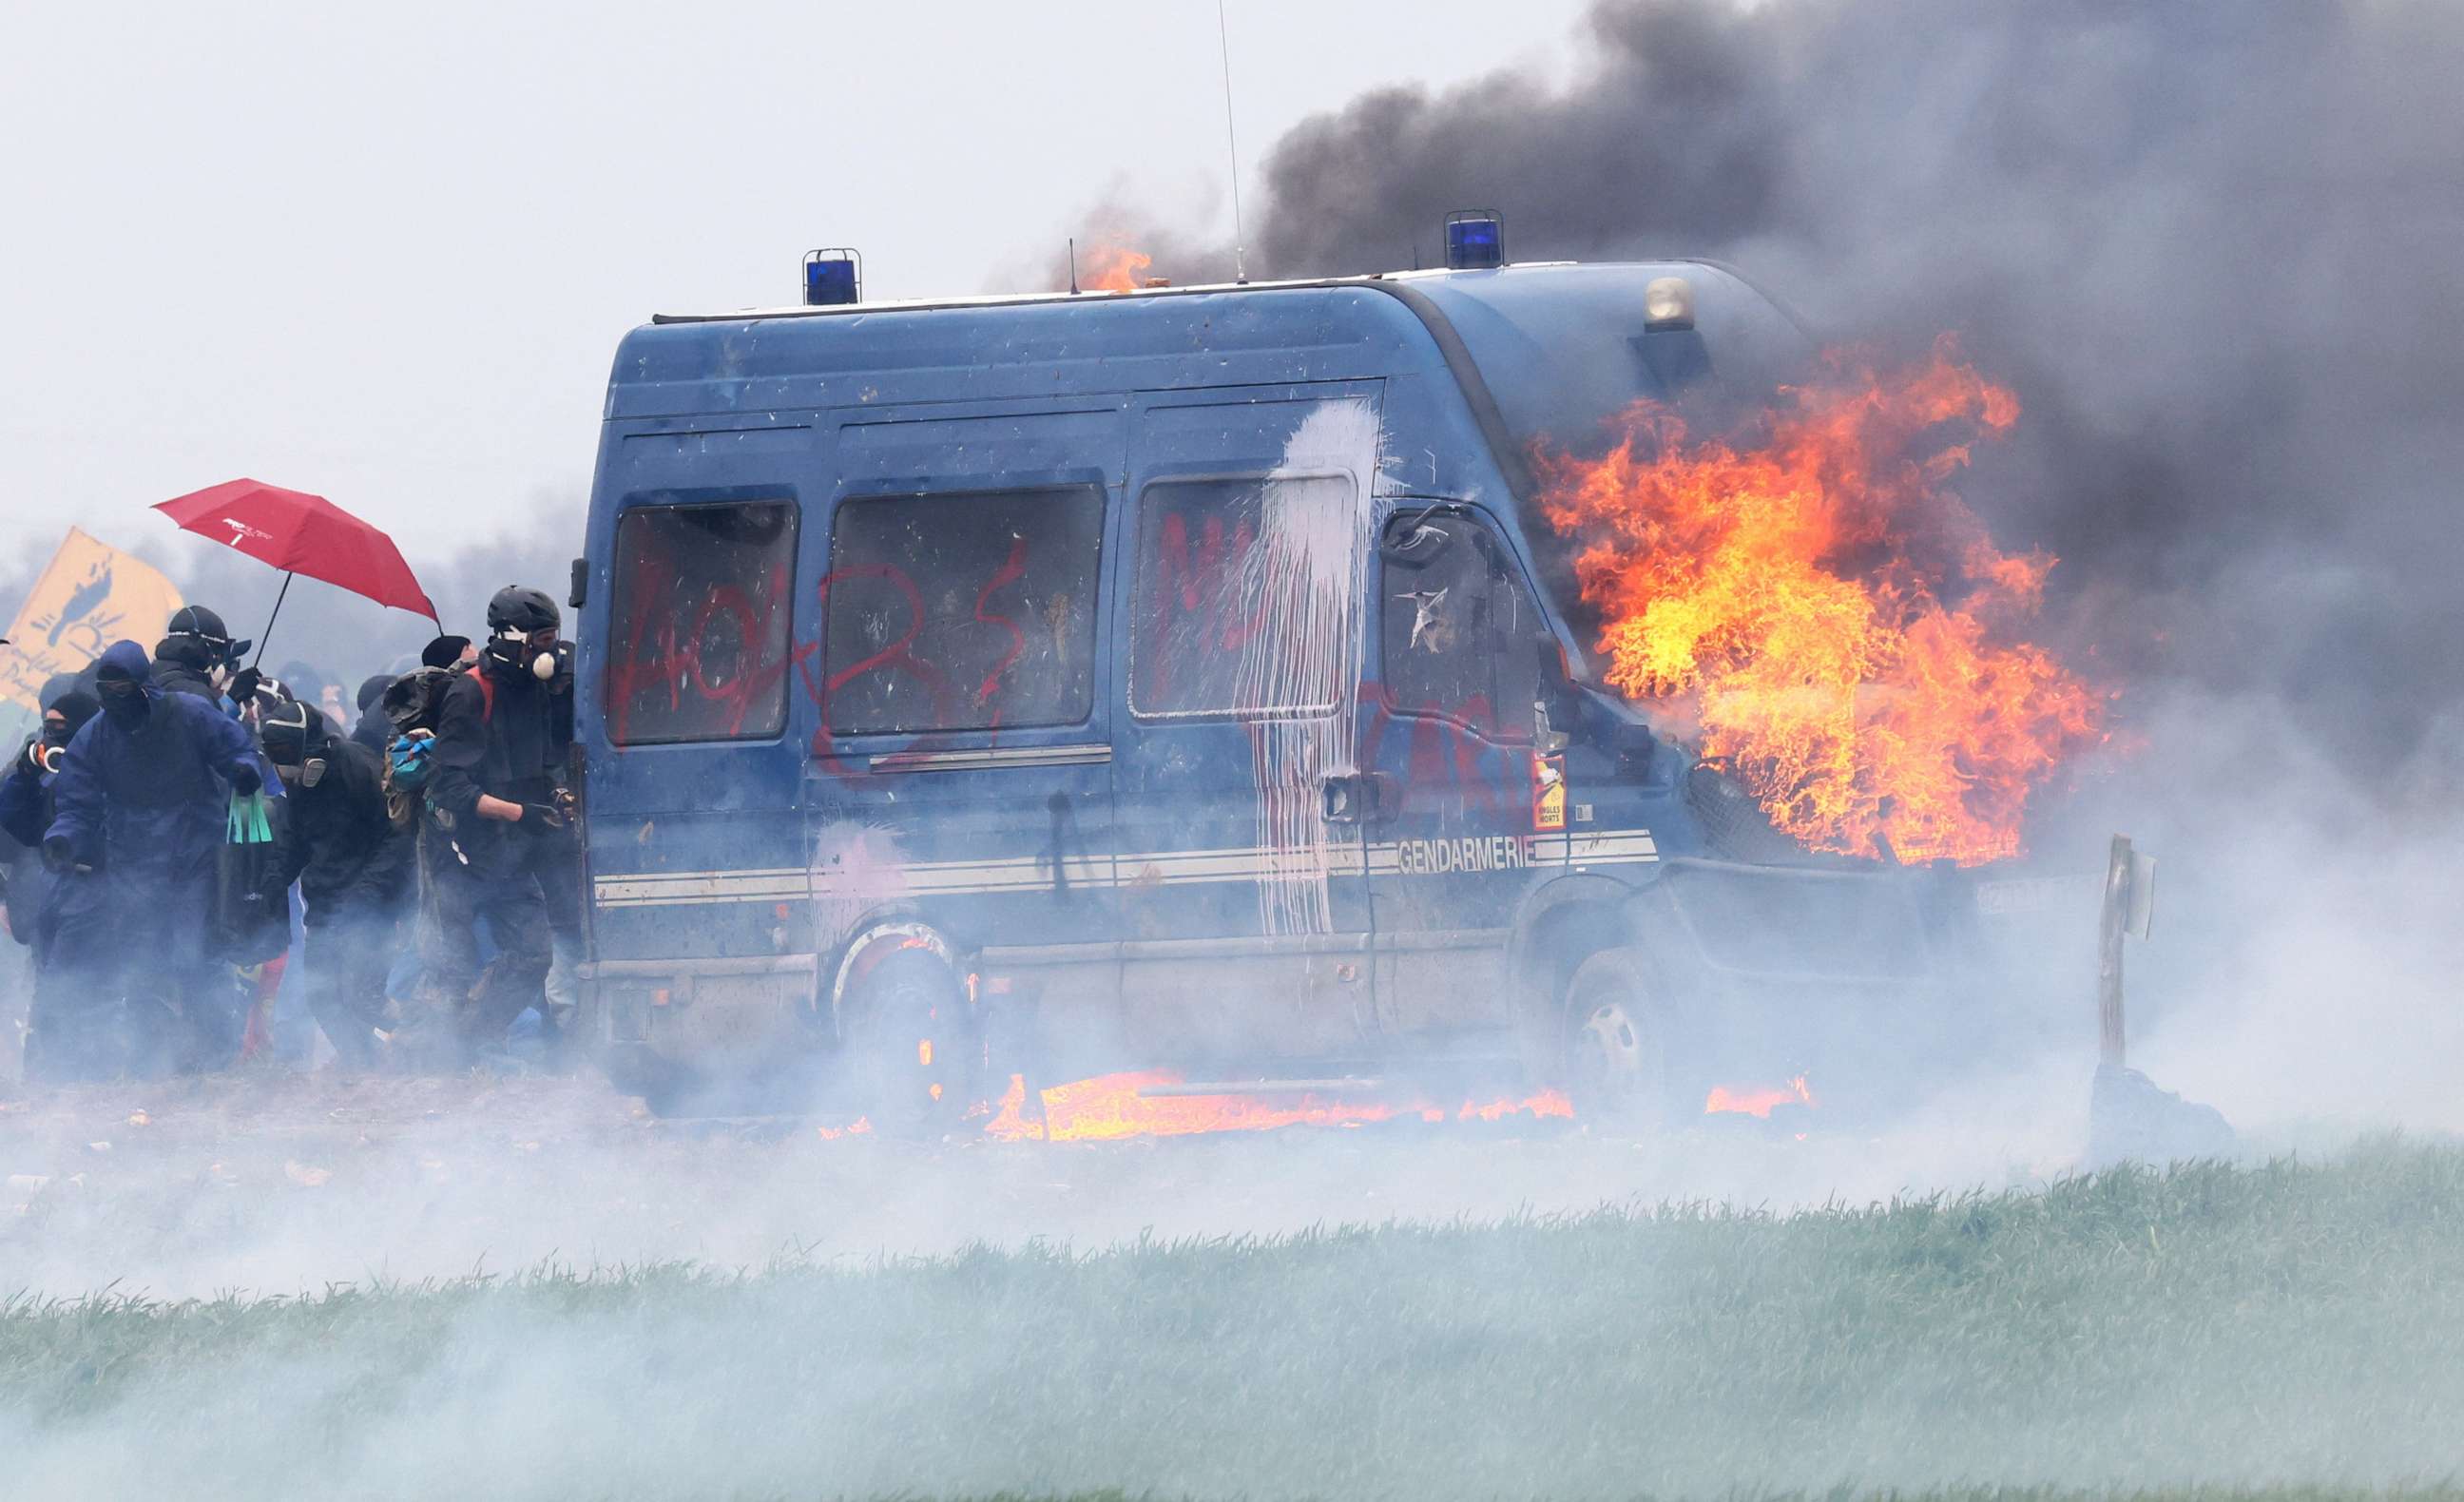 PHOTO: A police vehicle burns as protesters attend a demonstration called by the collective "Bassines Non Merci" on the construction site of new water storage infrastructure for agricultural irrigation in Sainte-Soline, France Mar. 25, 2023.